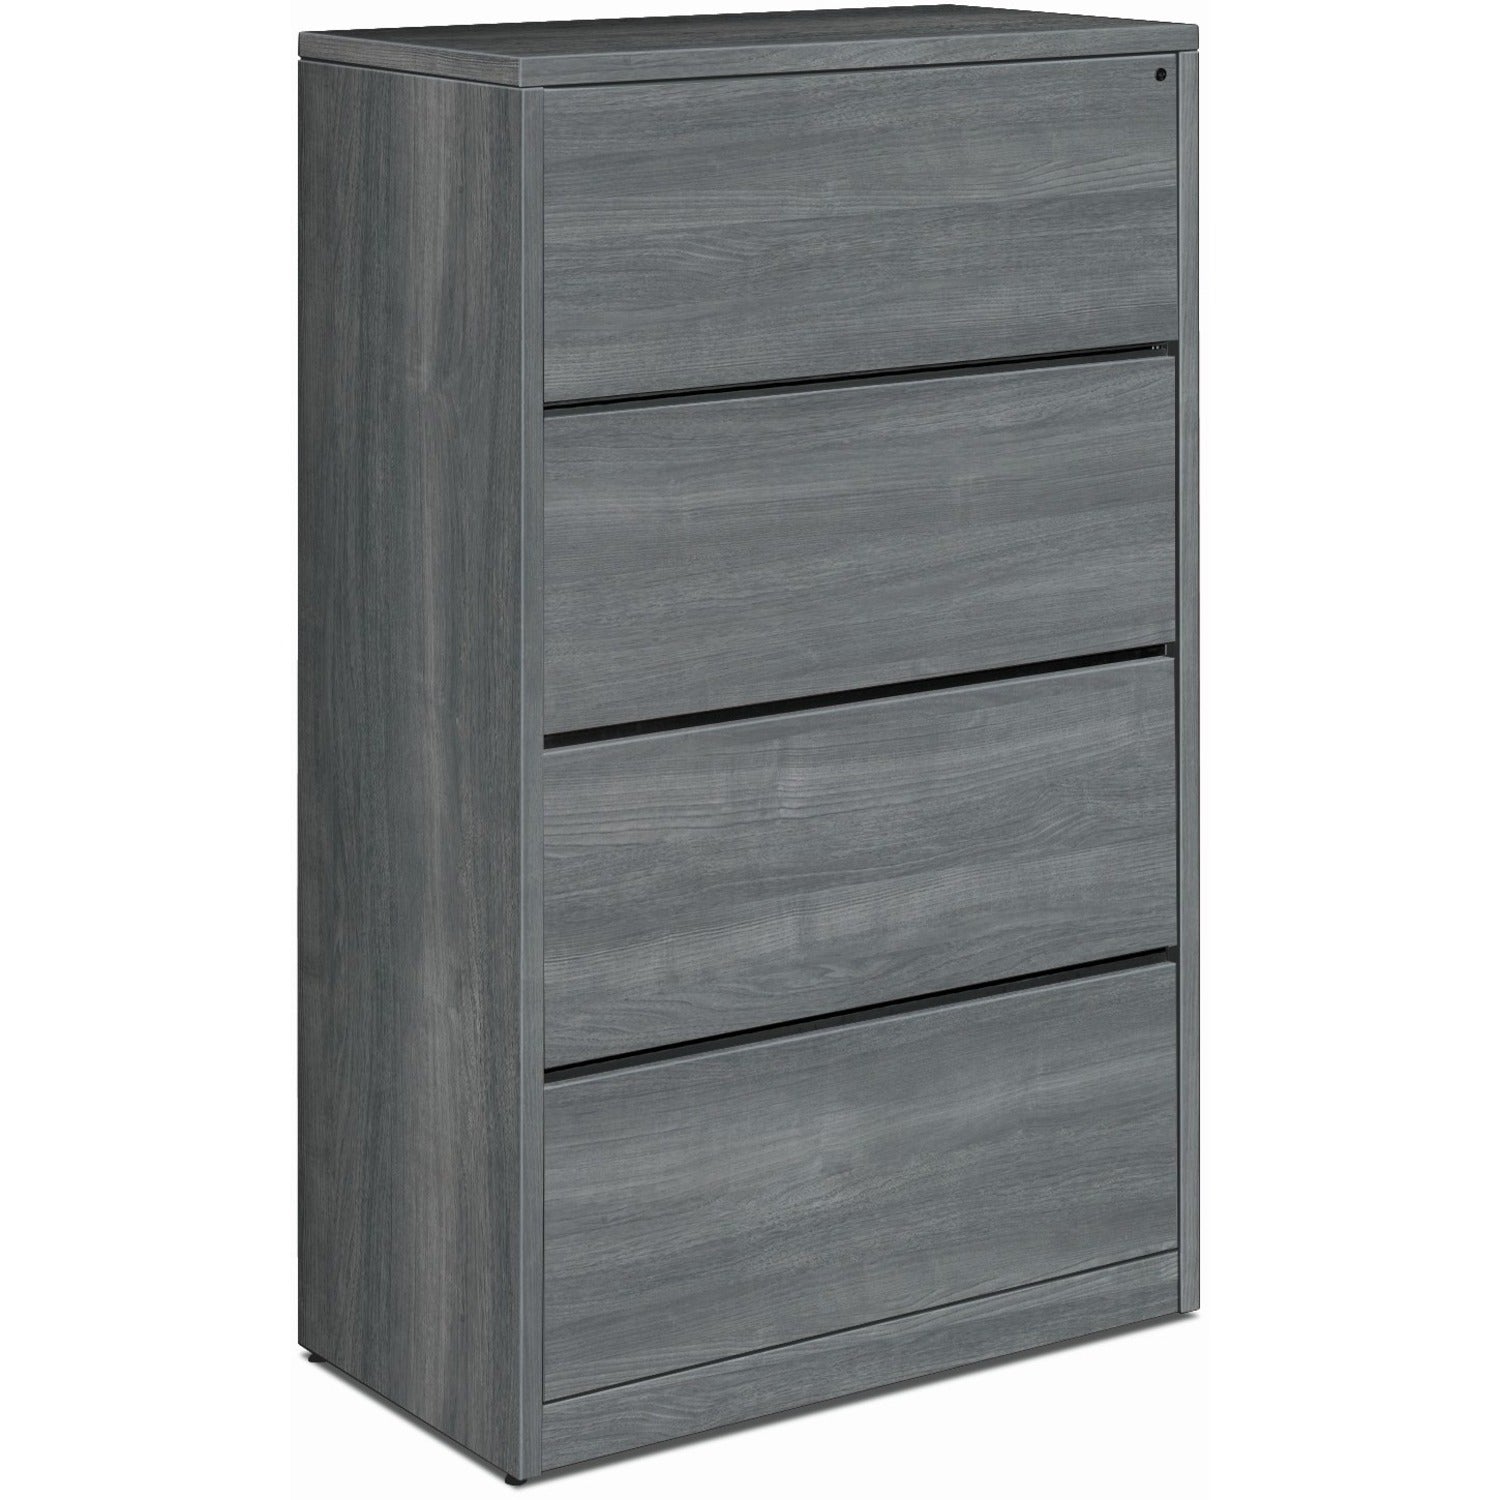 hon-10500-h10516-lateral-file-36-x-20591-4-drawers-finish-sterling-ash_hon10516ls1 - 1